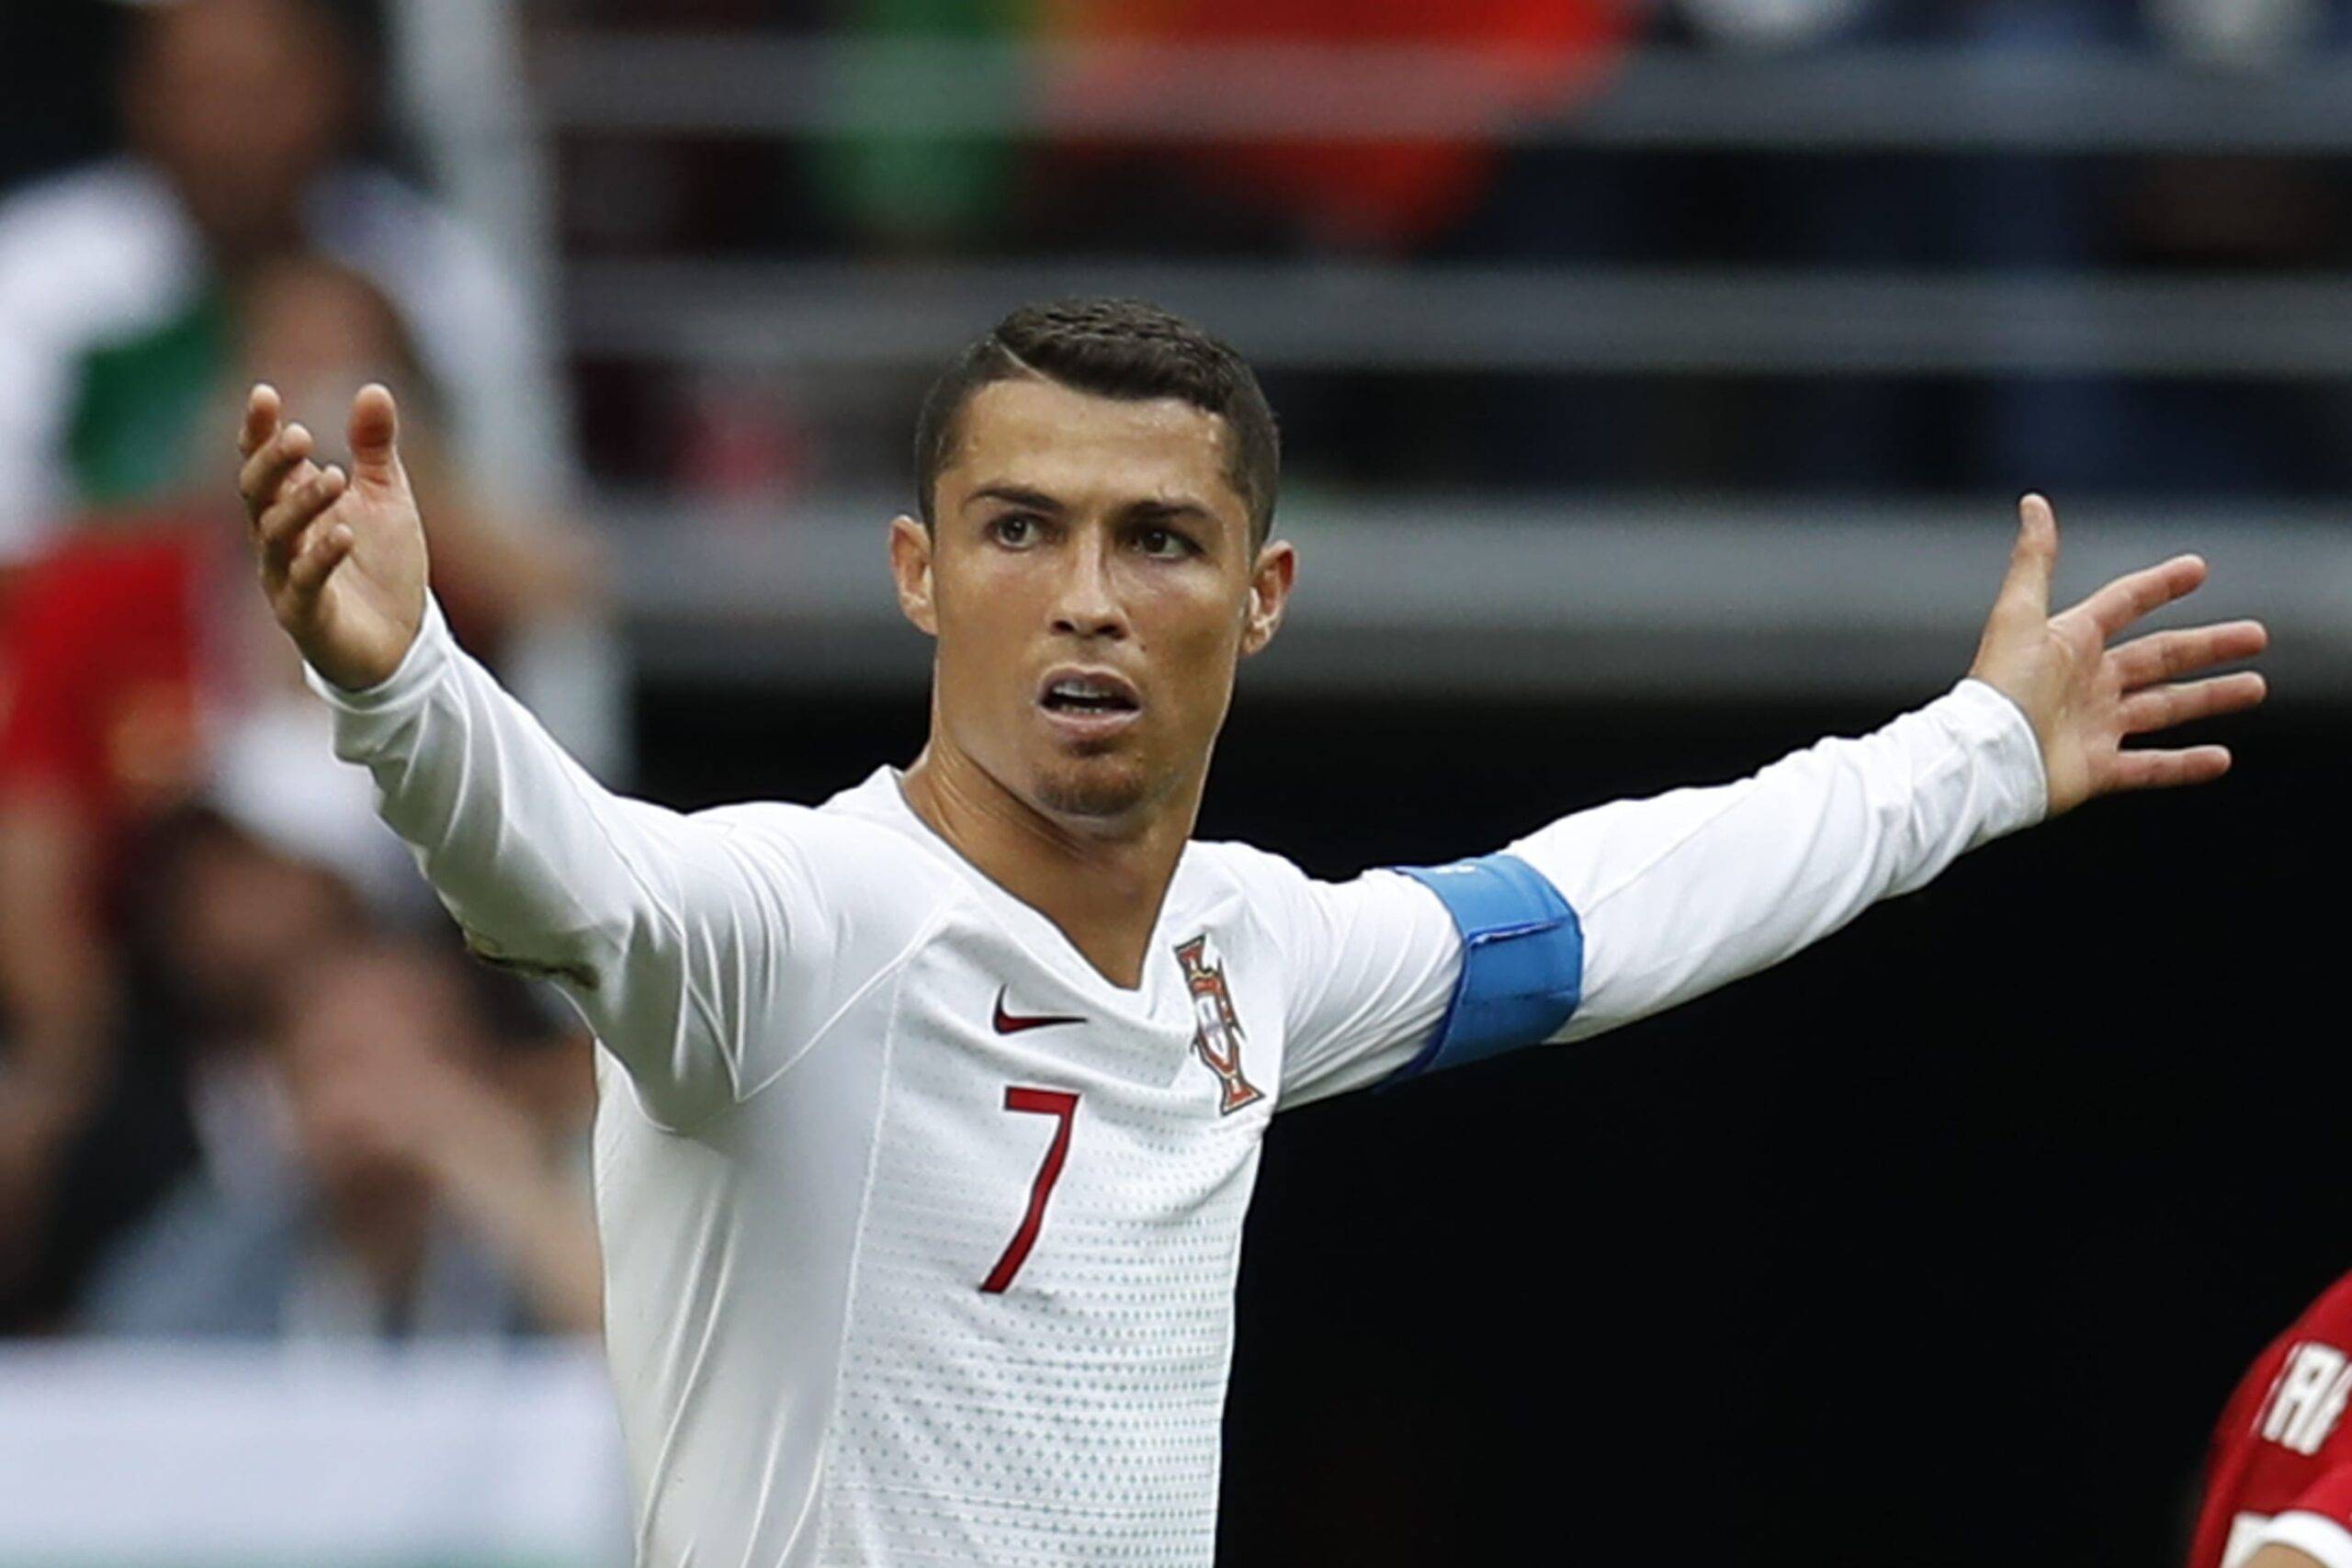 Portugal's Cristiano Ronaldo reacts during the 2018 FIFA World Cup in Moscow in Russia on 20 June 2018 [Sefa Karacan/Anadolu Agency]